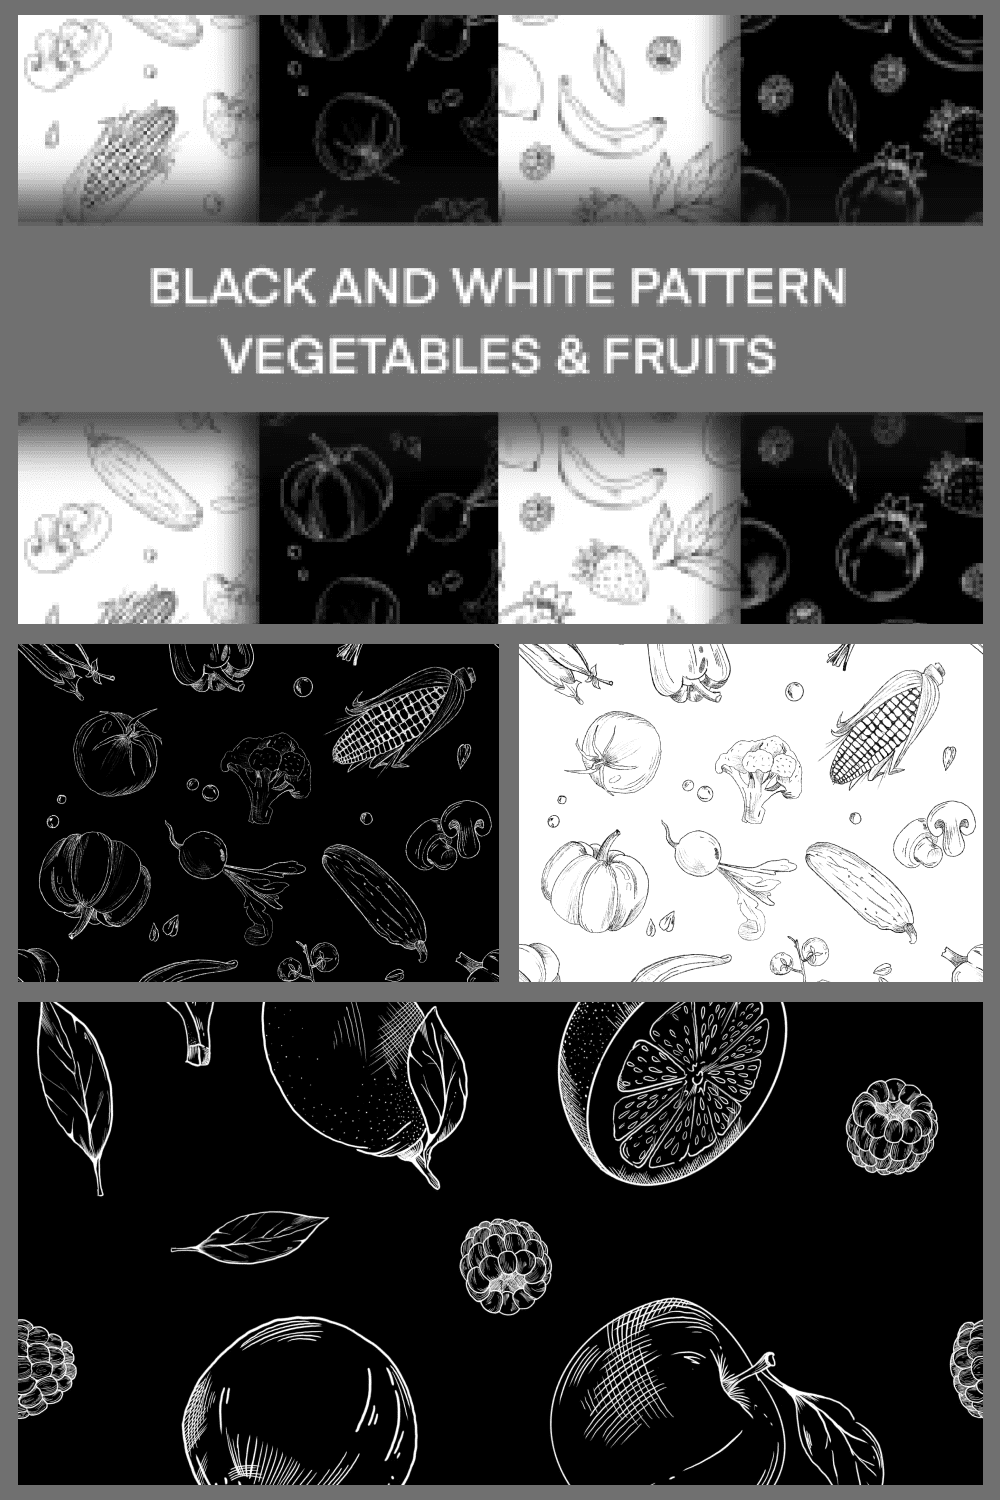 Collage of images of vegetables in black and white sketches.